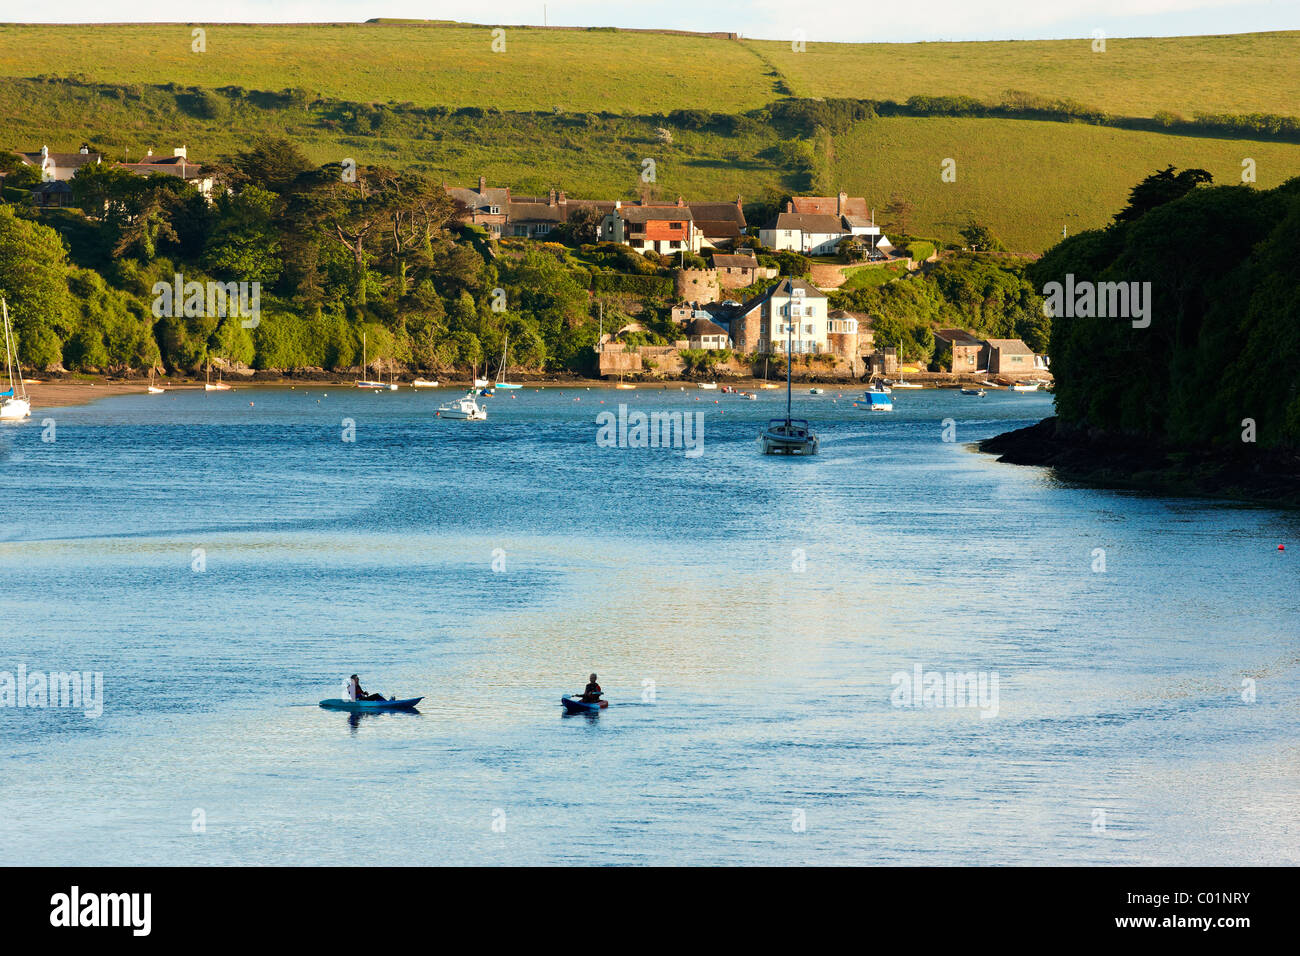 Canoeists on a summer's evening on the Avon estuary with the village of Bantham in the background. Devon UK Stock Photo